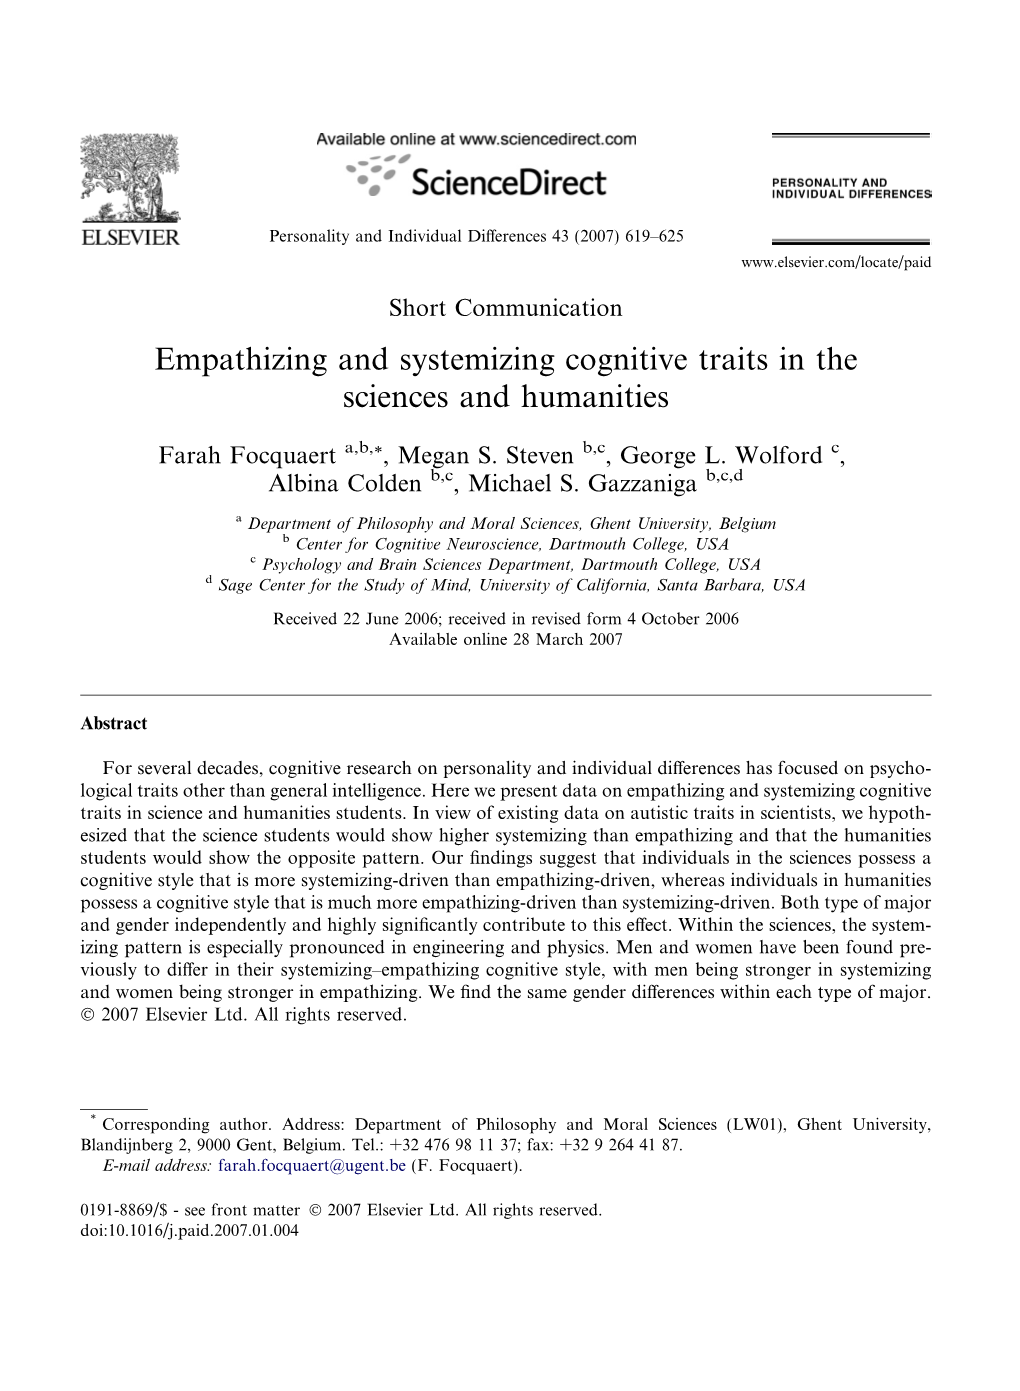 Empathizing and Systemizing Cognitive Traits in the Sciences and Humanities